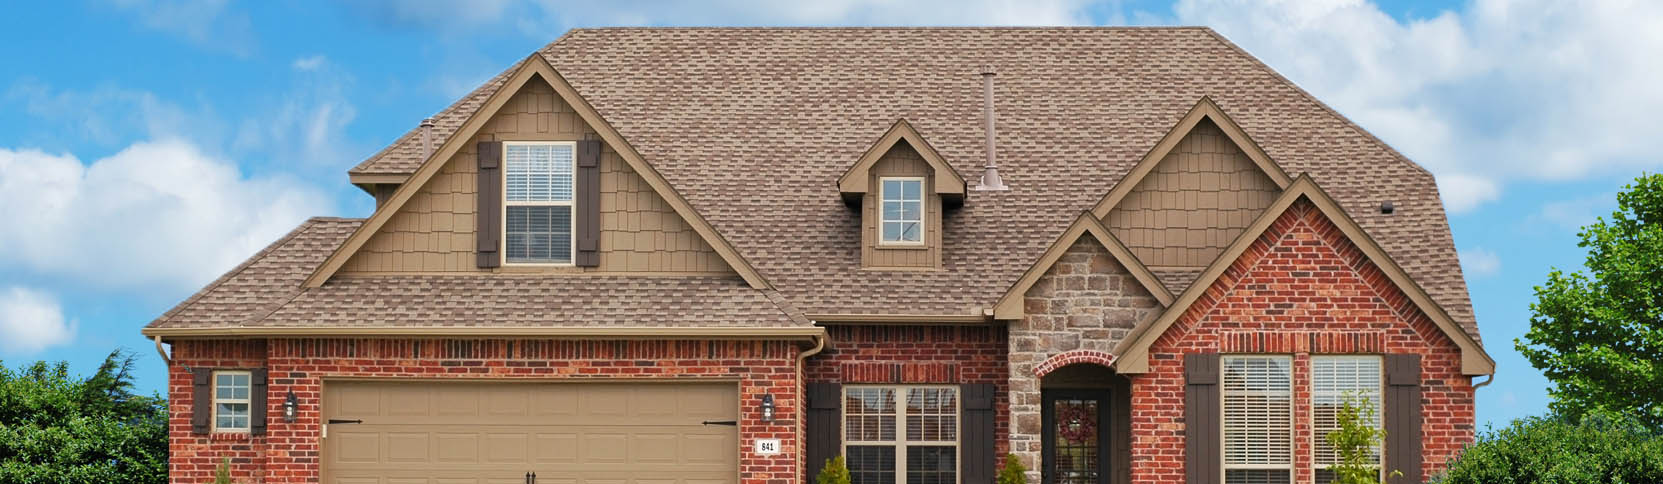 What Type Of Roof To I Need For My Business?